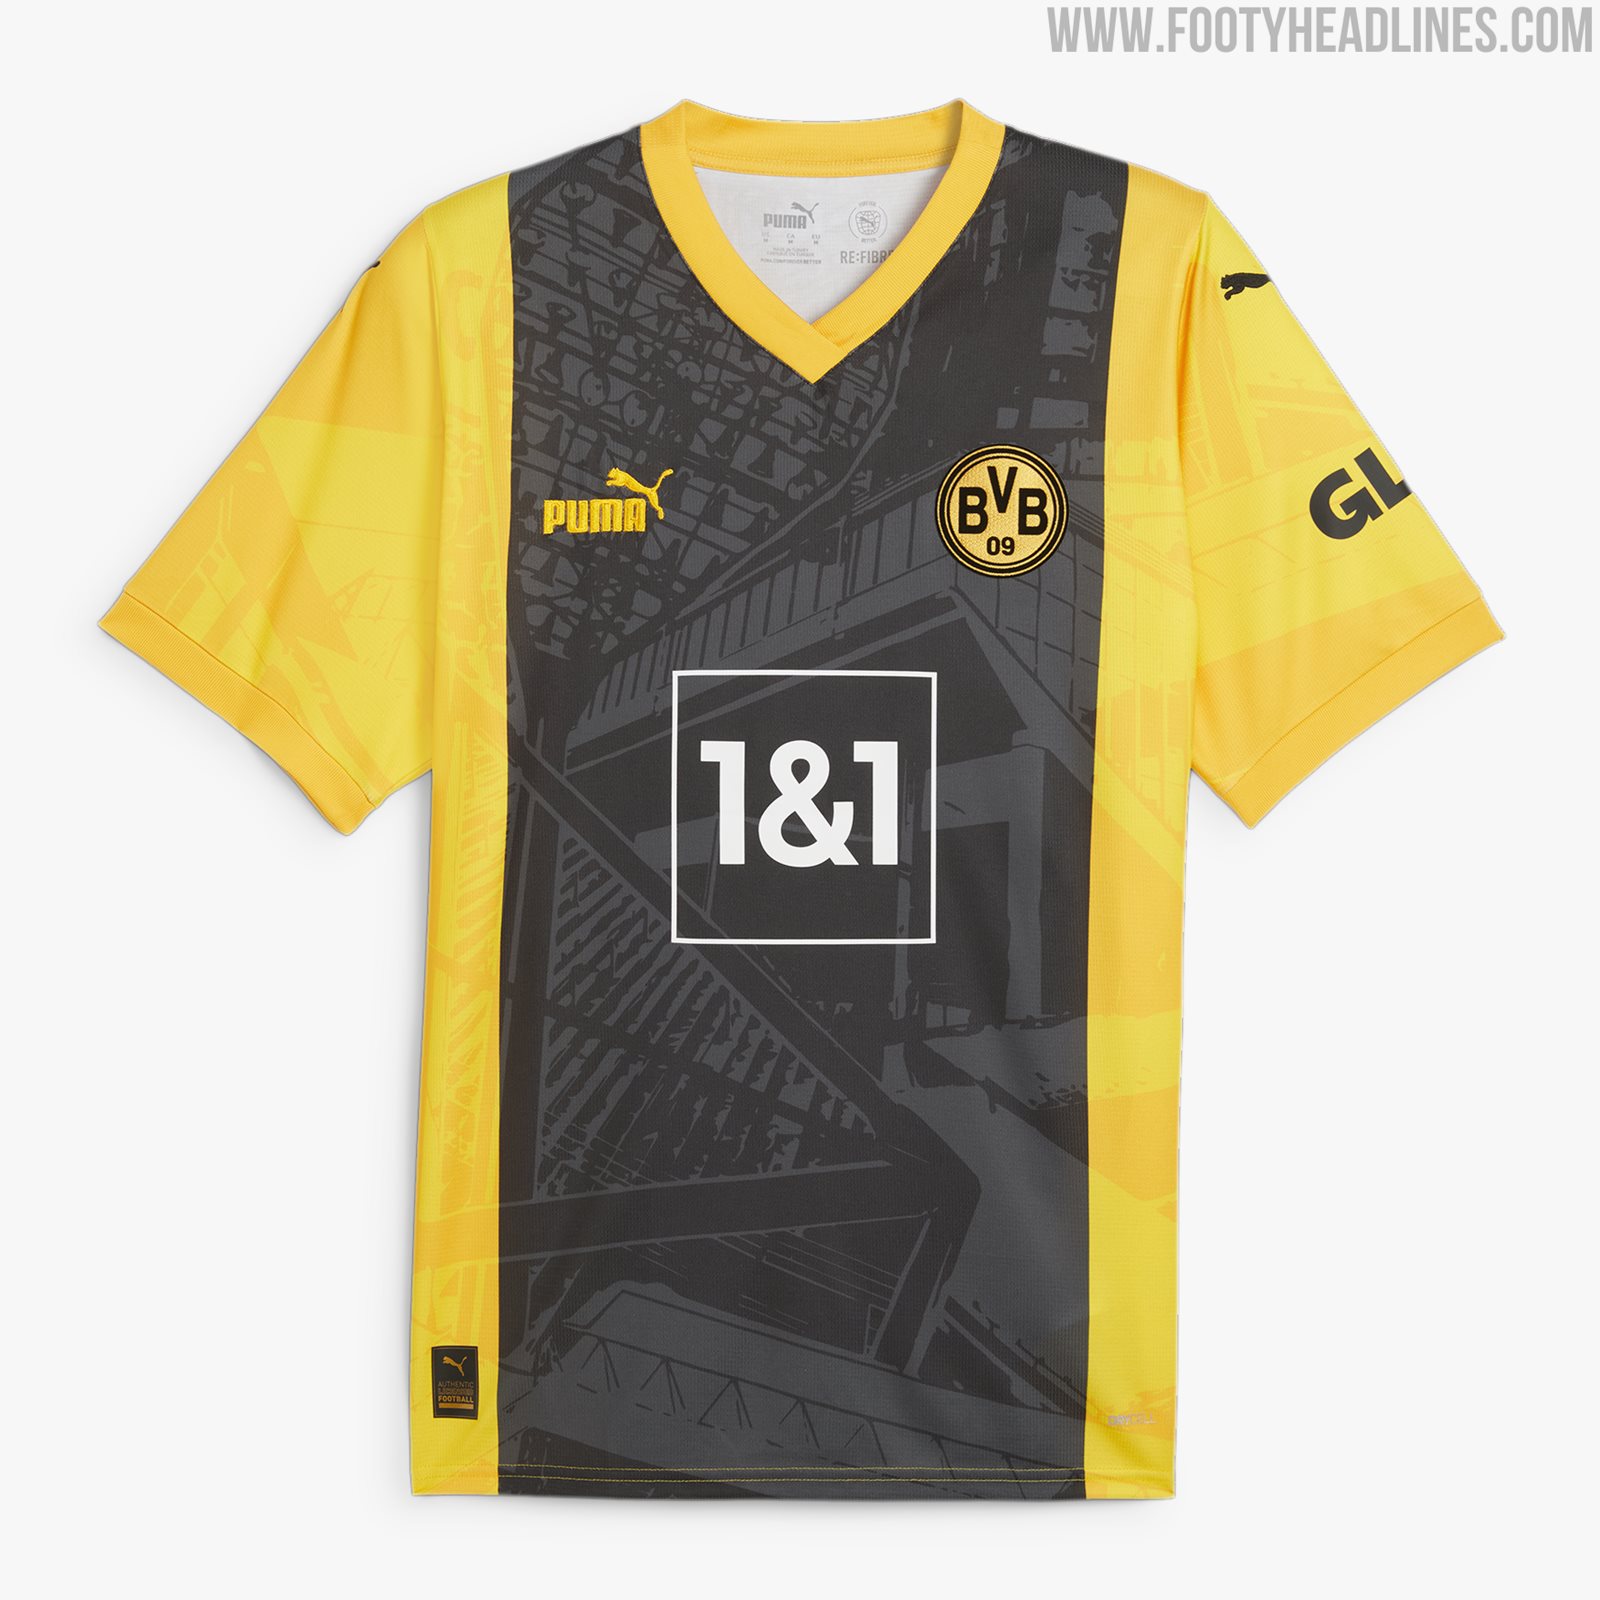 Dortmund 23-24 Special-Edition Kit Released - Footy Headlines